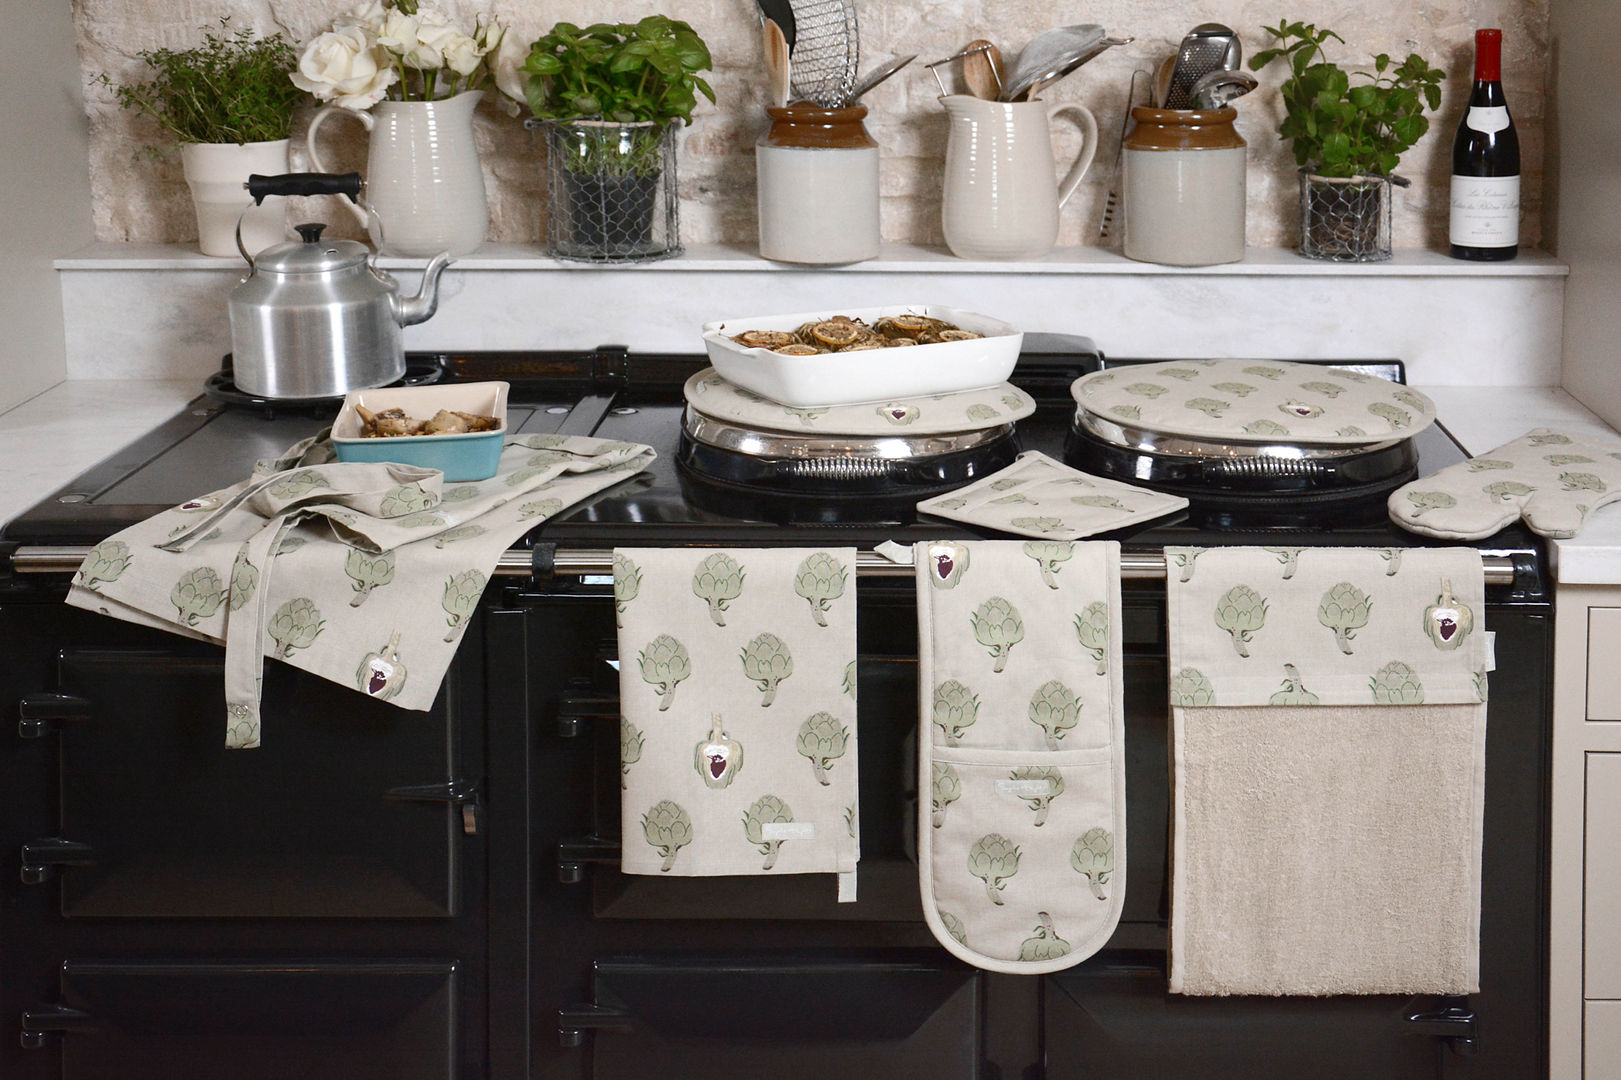 Artichoke Kitchen Collection homify Country style kitchen Cotton Red kitchen,artichoke,thistle,roller towel,tea towel,oven gloves,aga,green,stone,hob cover,autumn,seasonal,Accessories & textiles